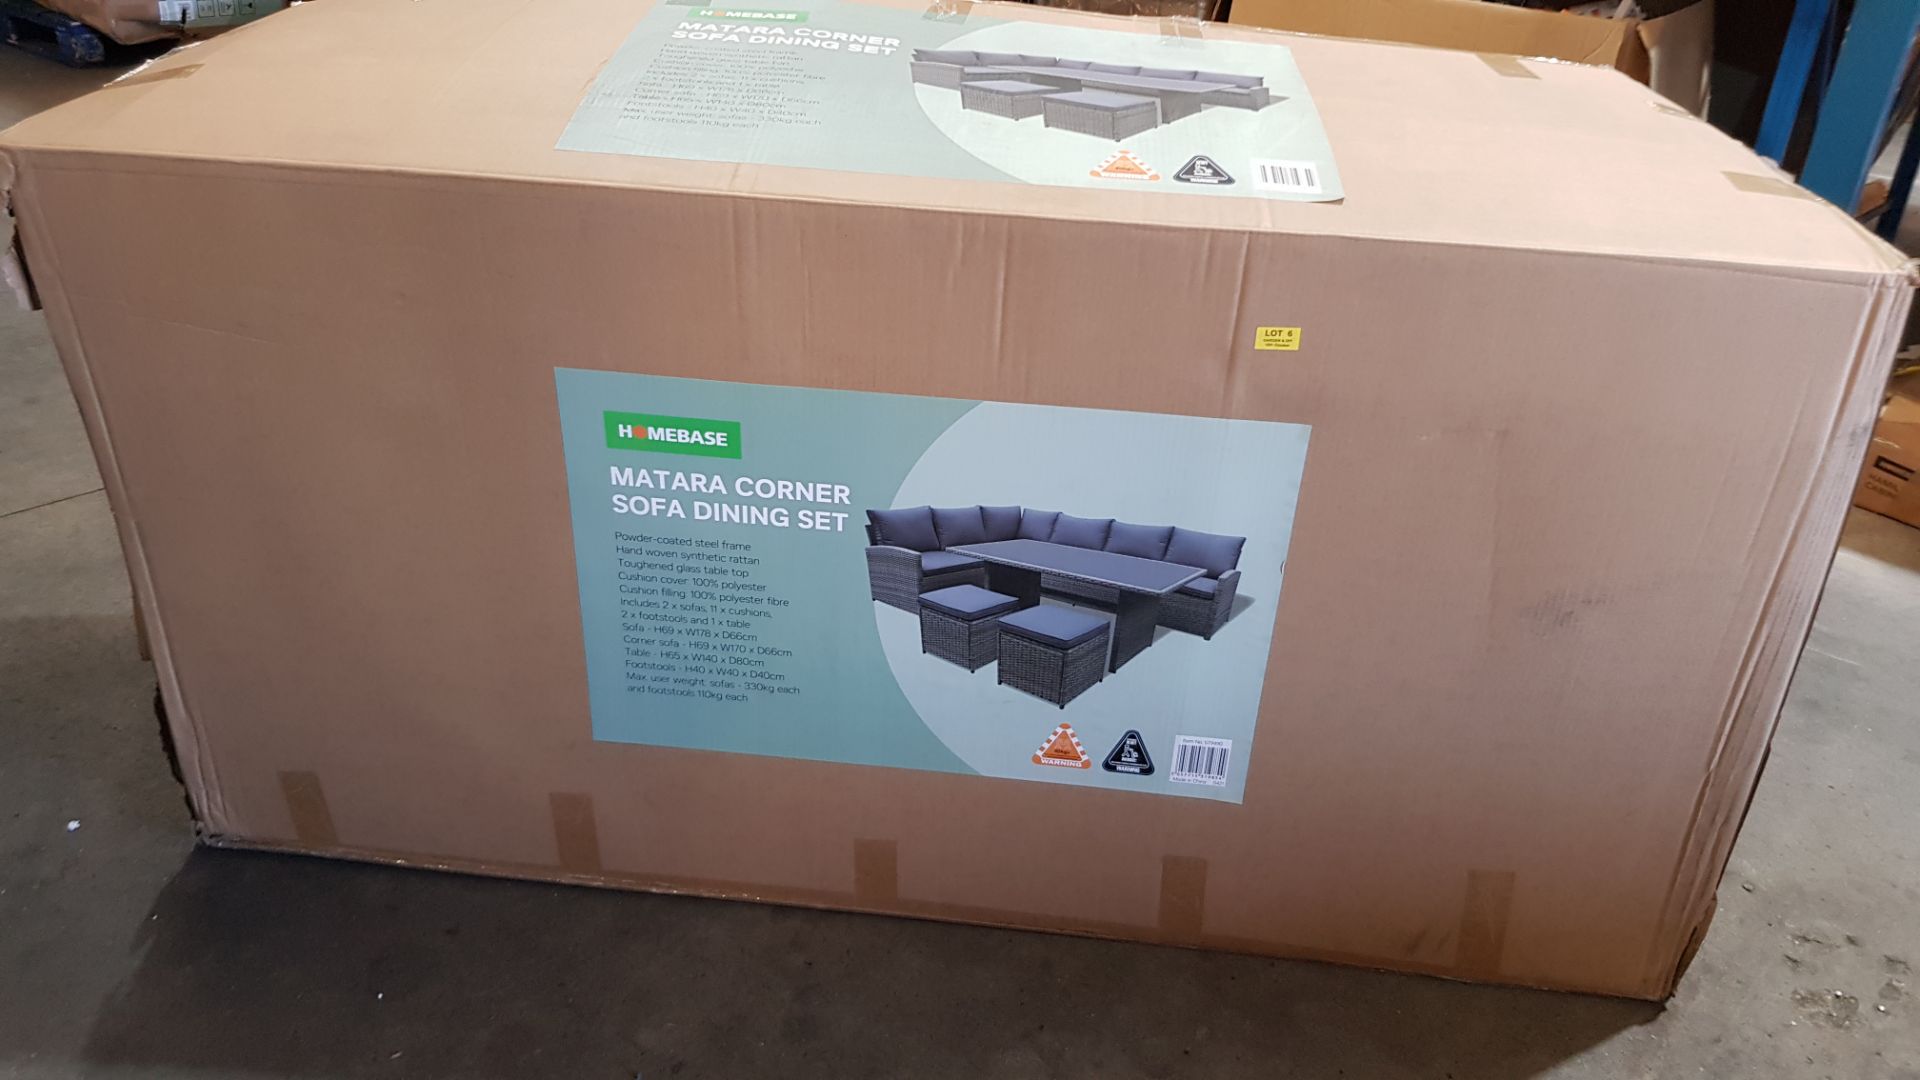 1x Matara Corner Sofa Dining Set RRP £645. Contents Appear As New. Clean, In Original Packaging Wi - Image 3 of 5